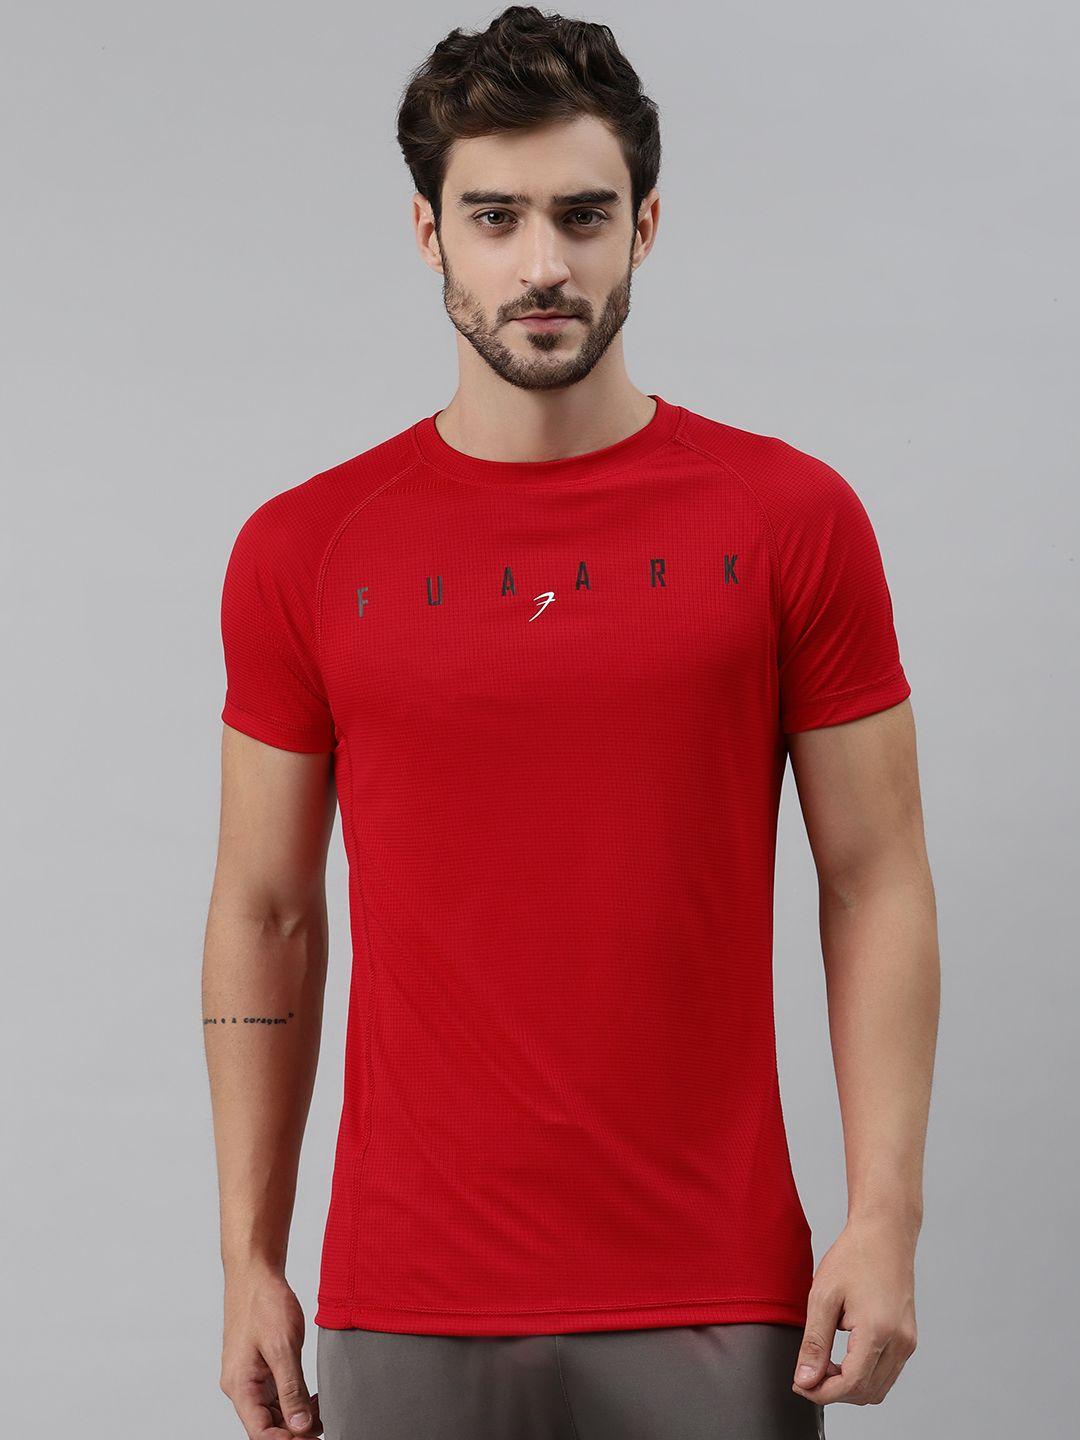 fuaark men red & black slim fit self-checked training t-shirt with brand logo detail